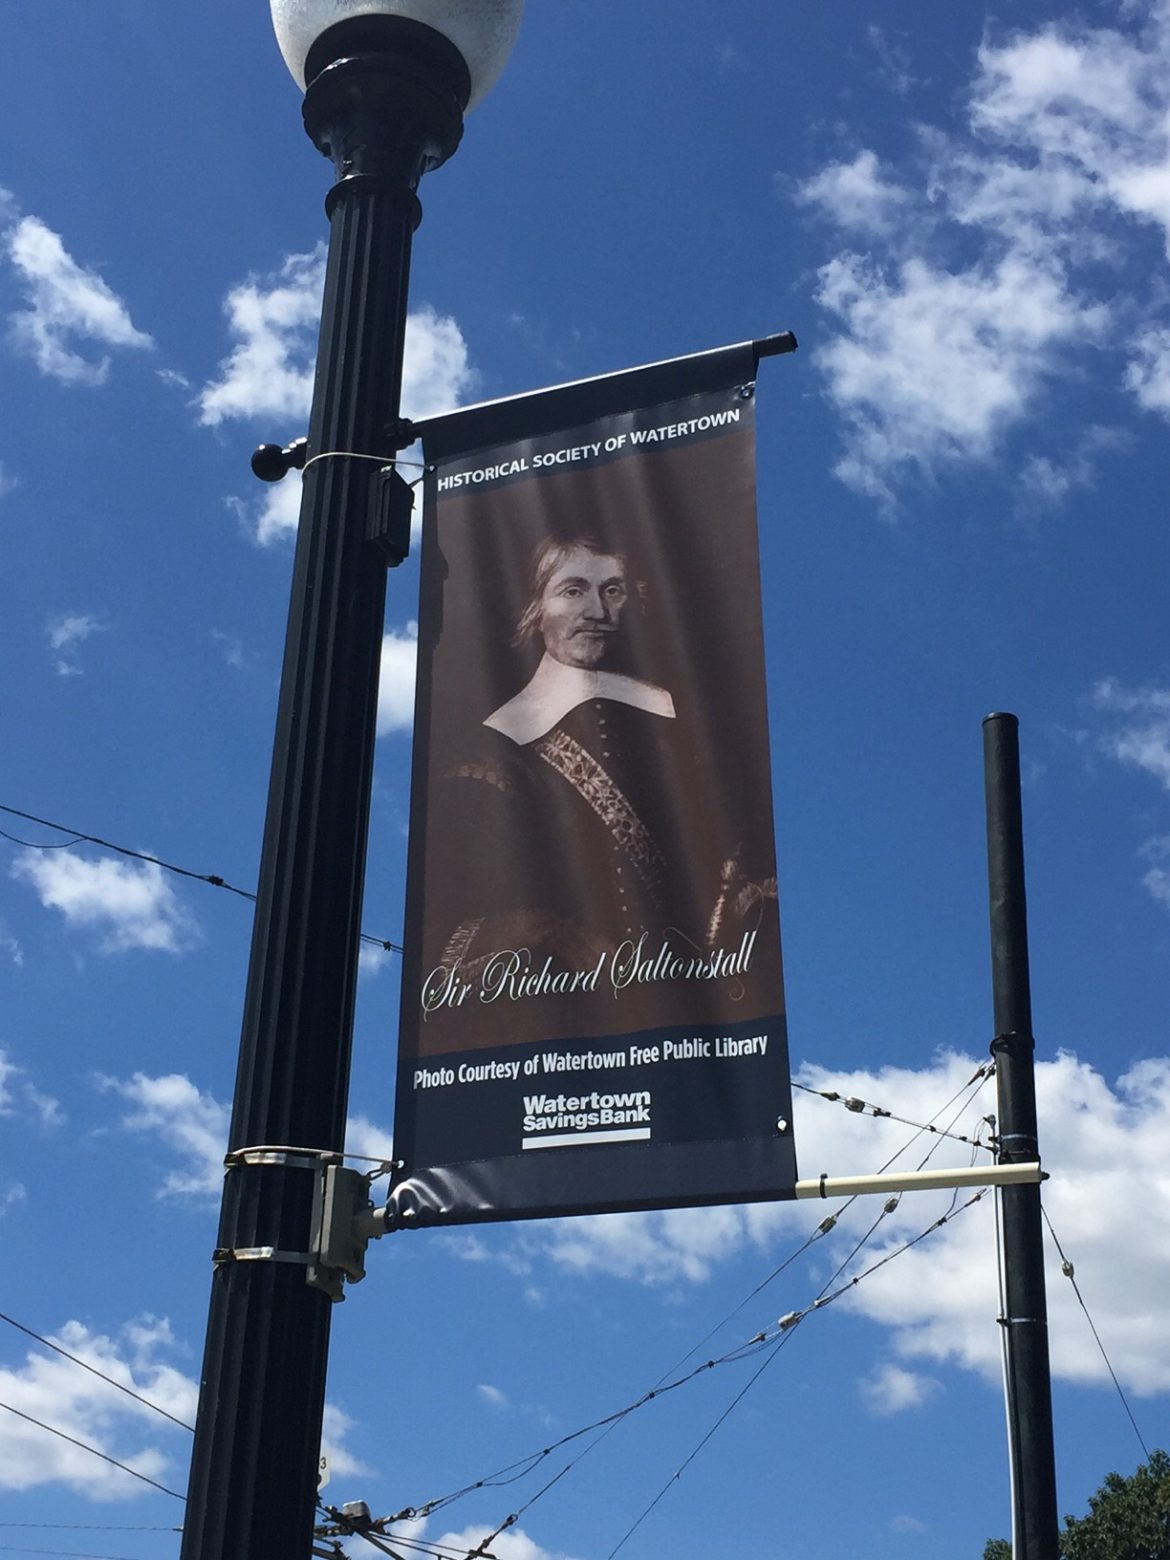 This banner features Sir Richard Saltonstall, one of the historical figures chosen by the Historical Society for their contributions not only in town but beyond Watertown.